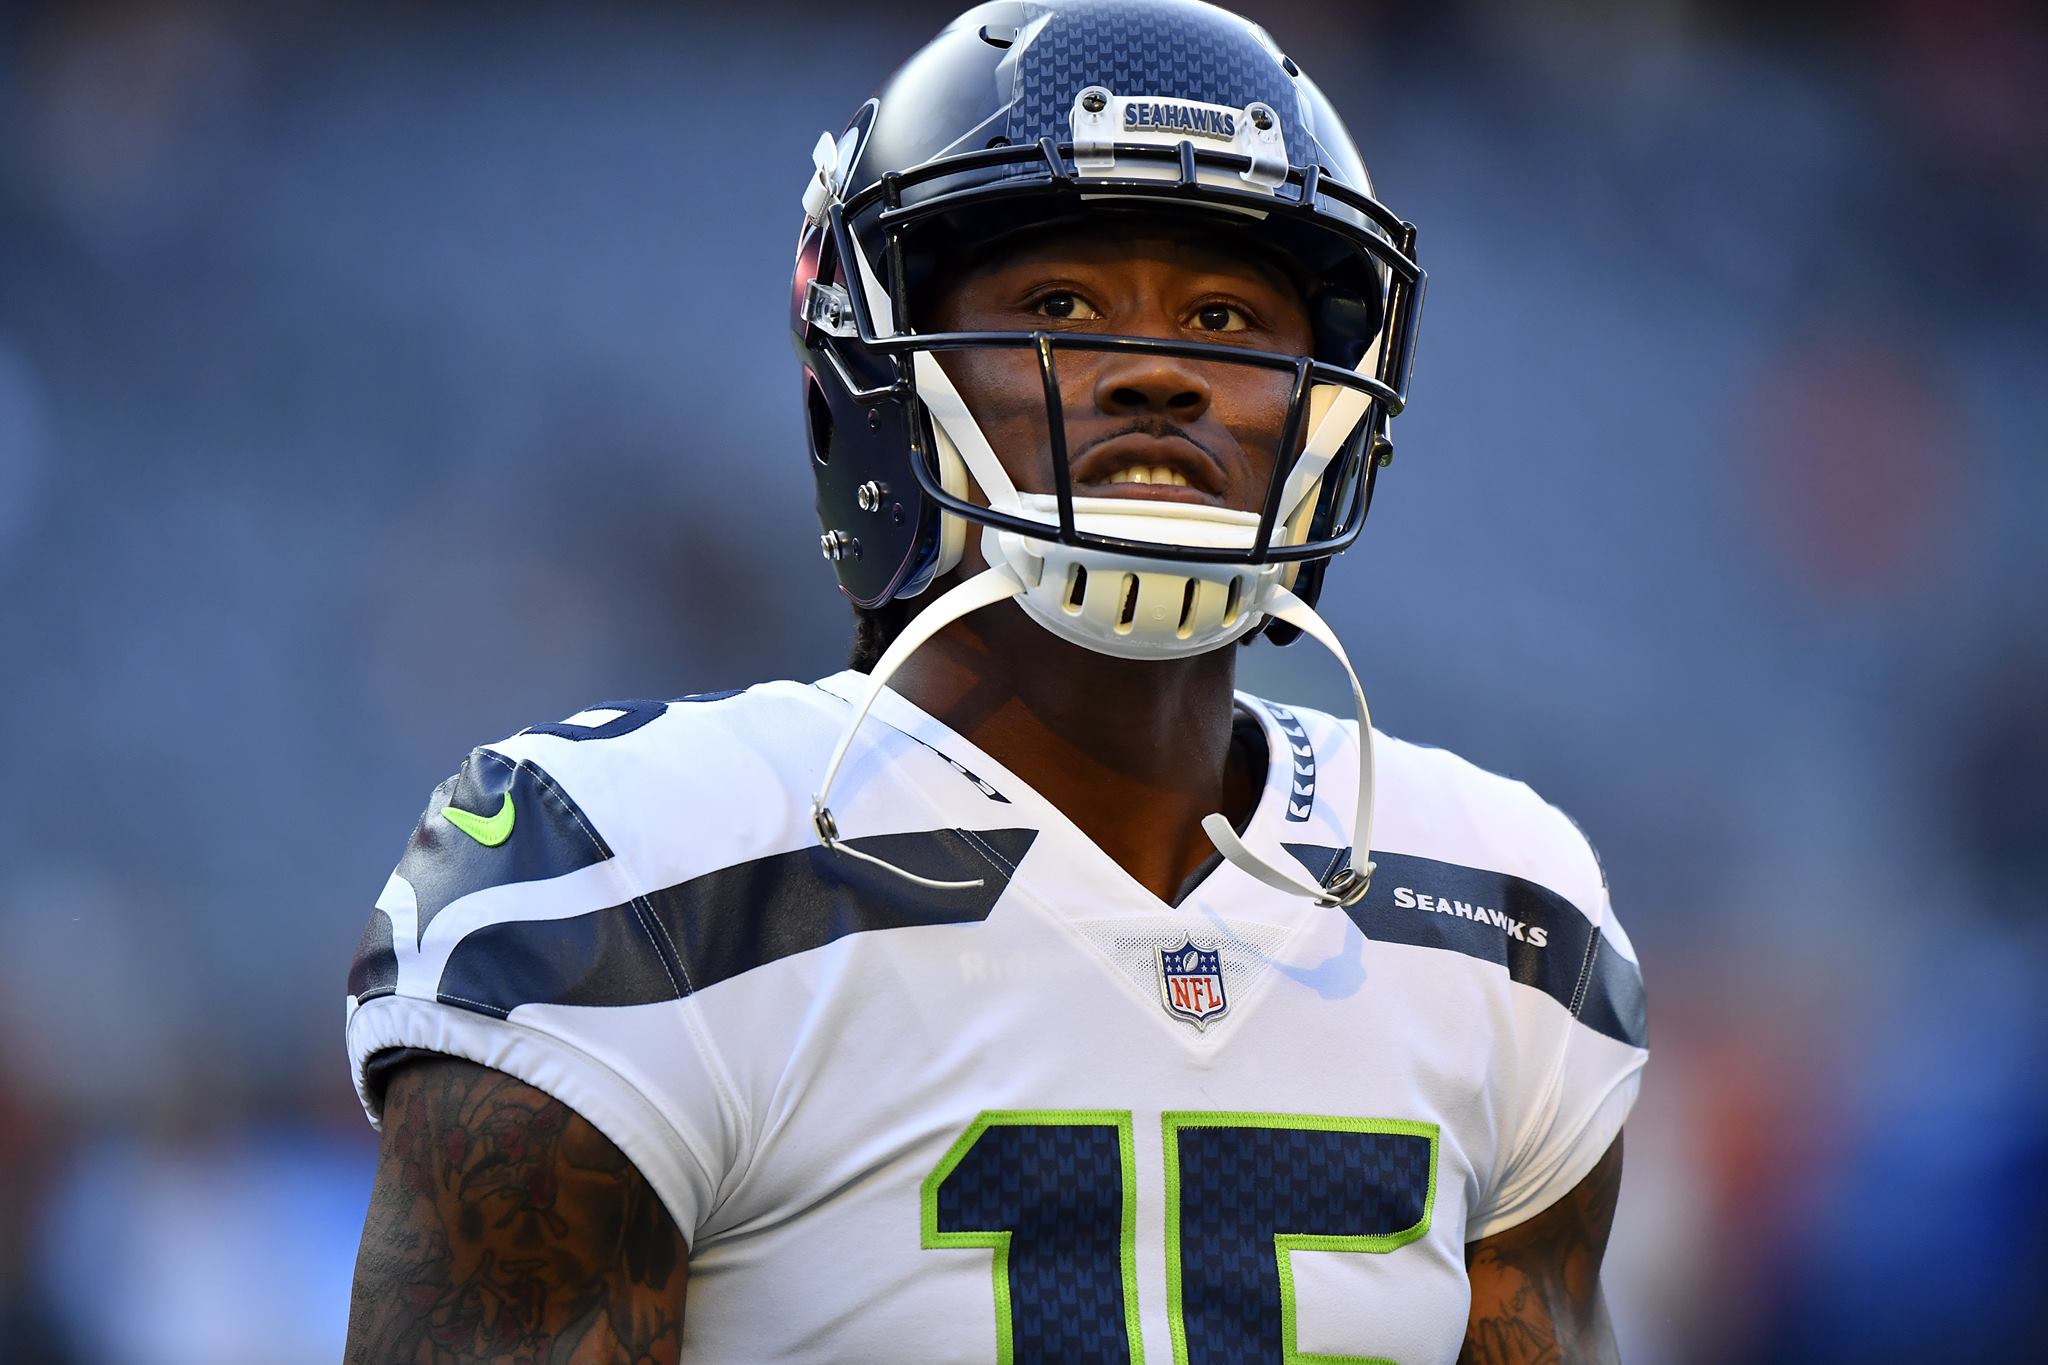 Brandon Marshall in a game for SeaHawks